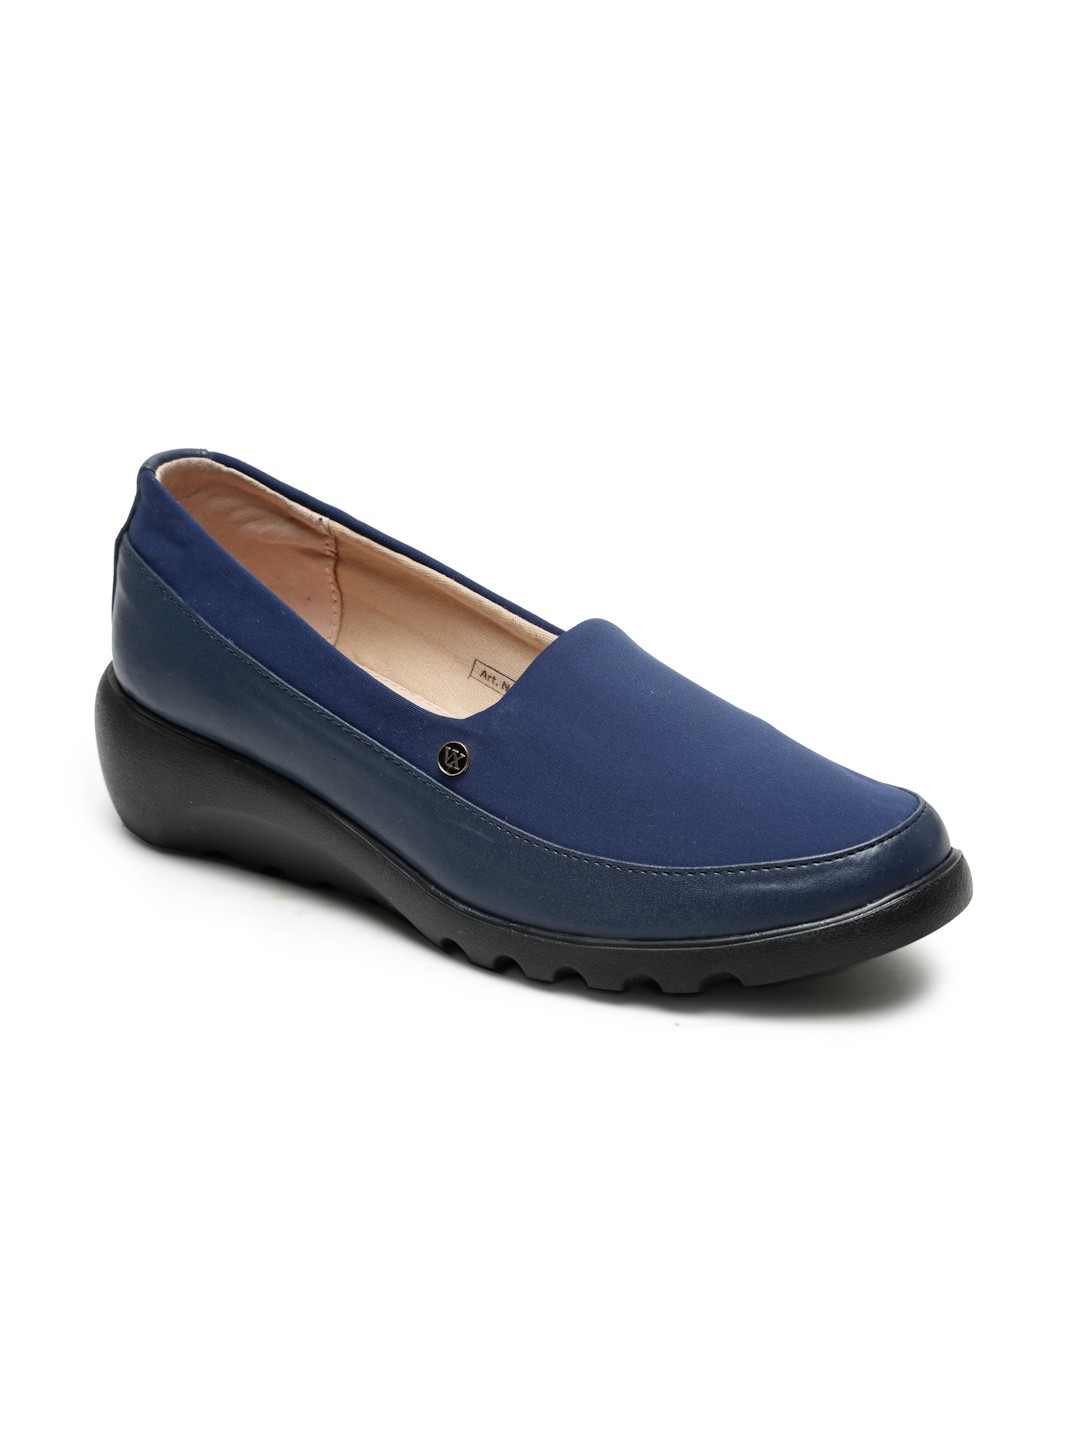 Buy Von Wellx Germany Comfort Women's Blue Casual Shoes Elsa Online in Maharashtra